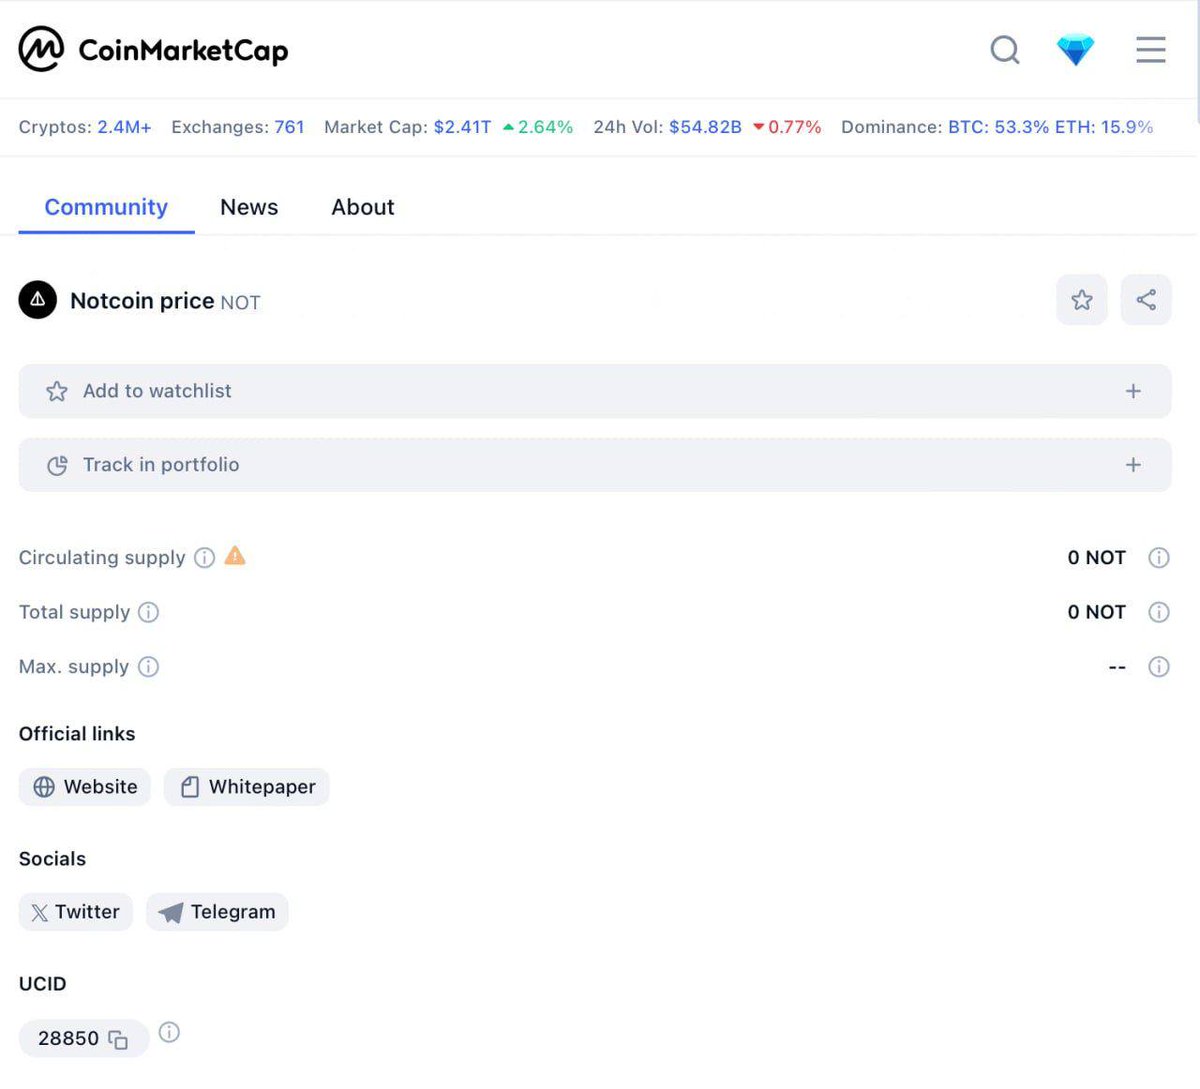 📈 Notcoin takes a step forward with its listing on Coinmarketcap! Will May be the month they finally launch? Keep an eye on this promising project! #Crypto #Notcoin #Coinmarketcap #Cryptocurrency #Blockchain #Altcoins #Launch #Investment #CryptoProjects #CryptoNews